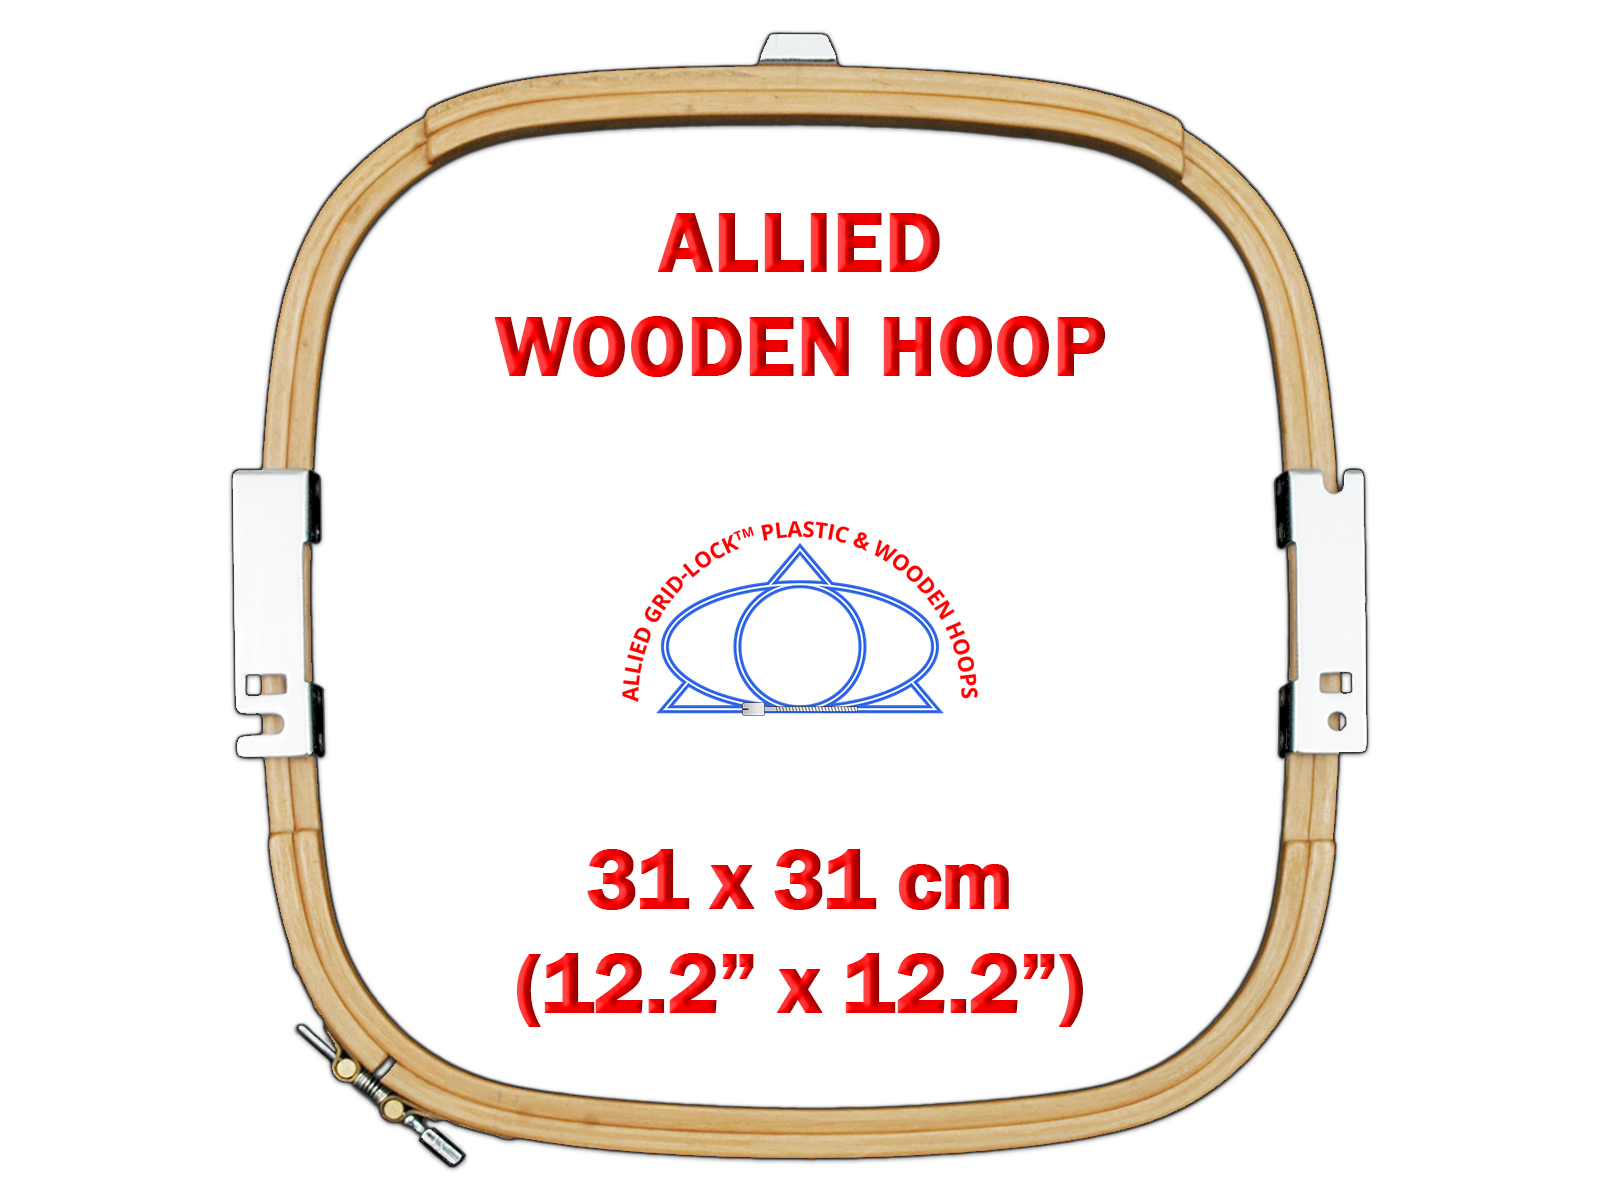 can this hoop 12.2X12.2 sew a square 11.78X11.78?